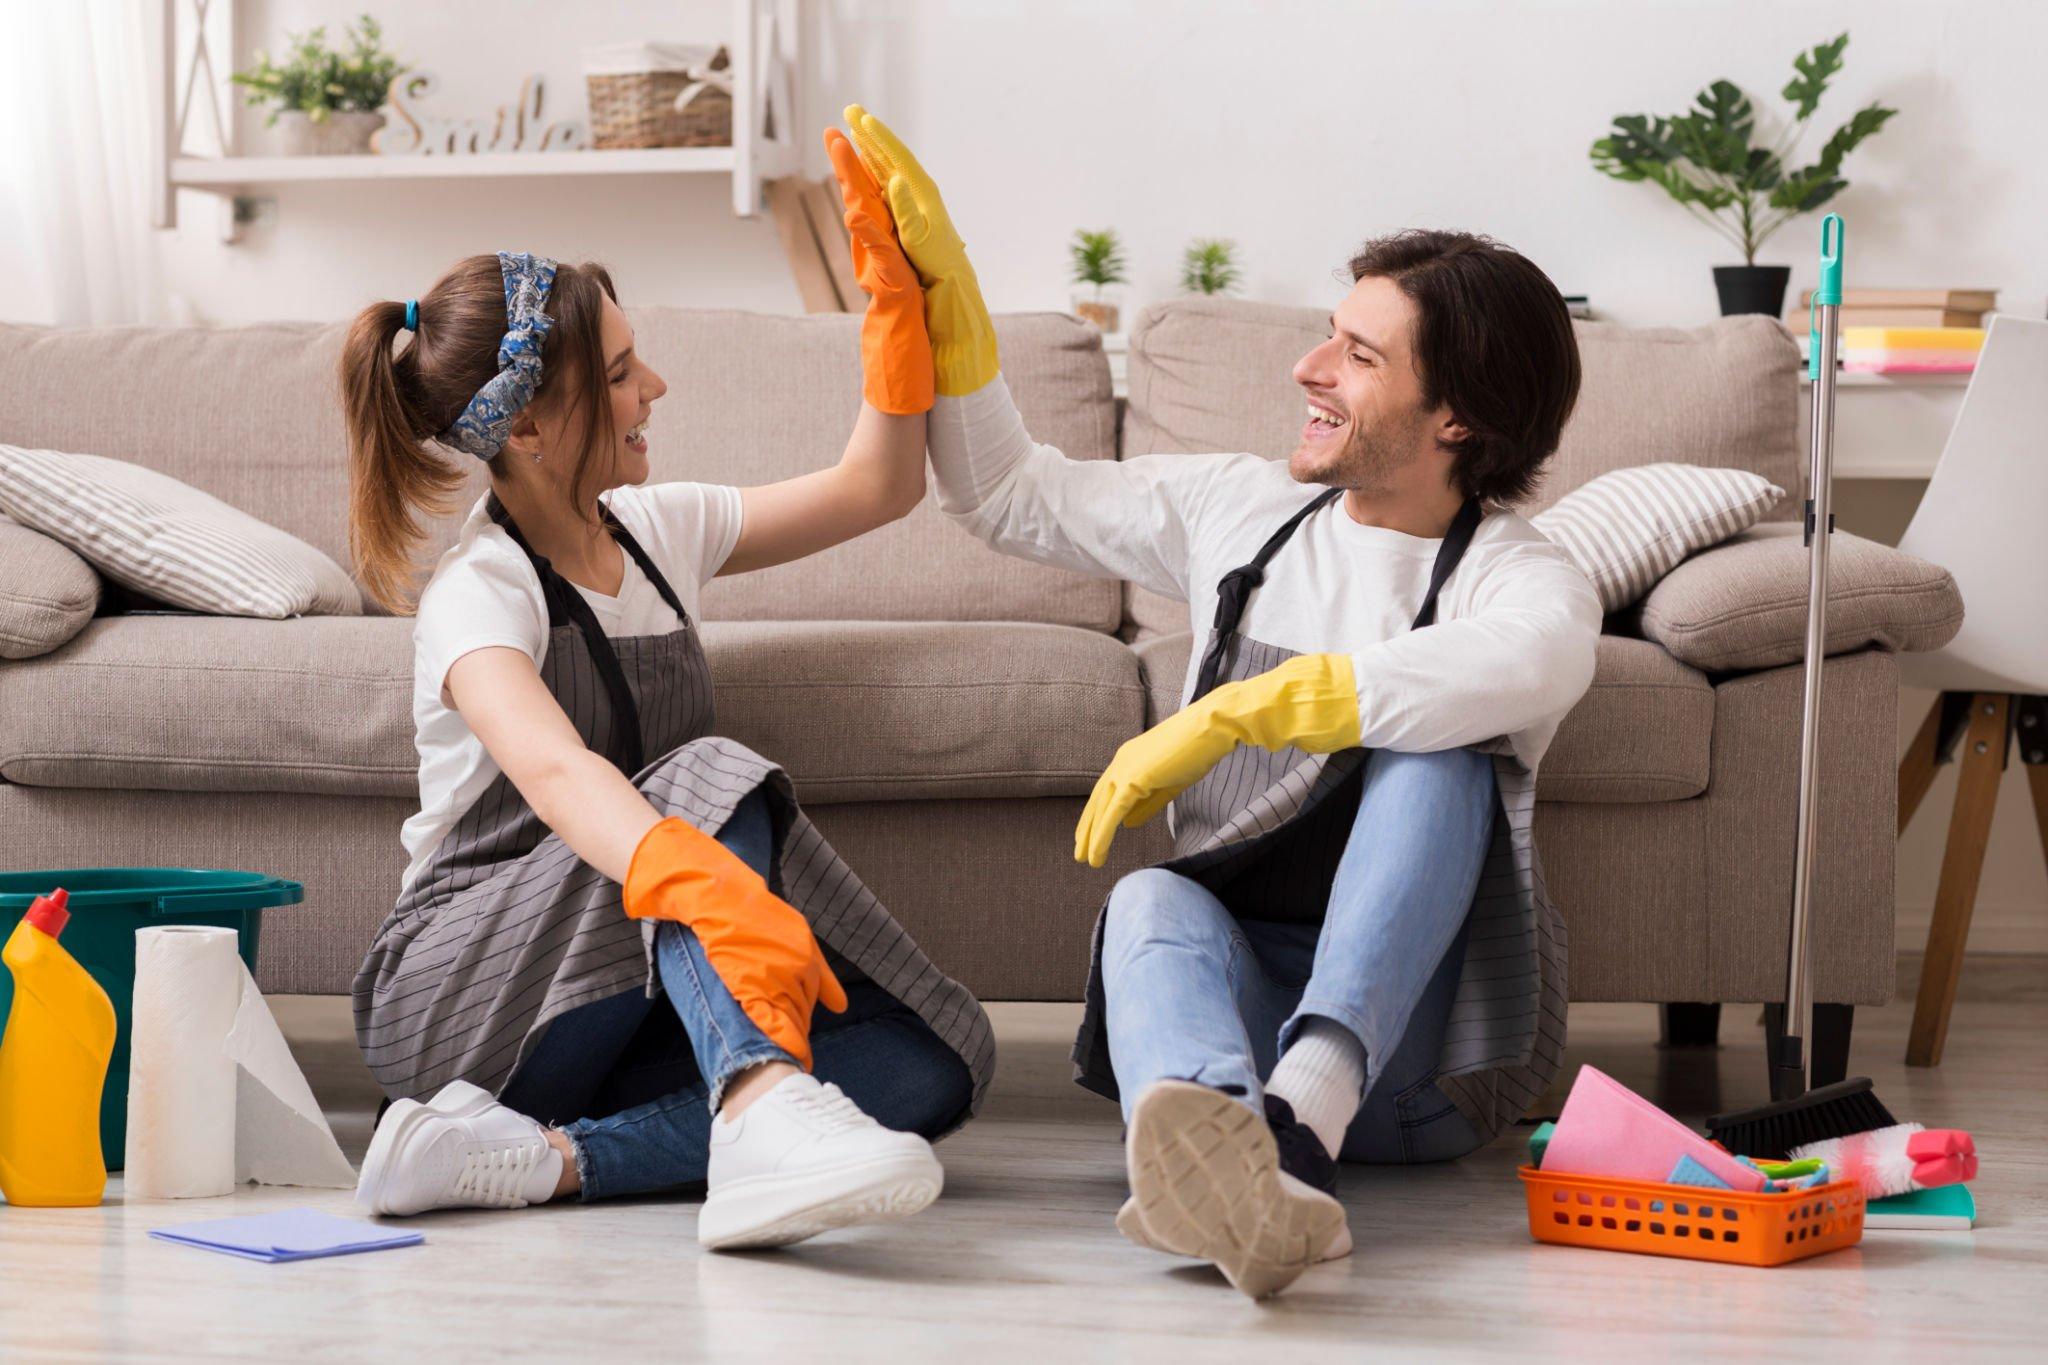 5 Things to Consider Before Hiring a House Cleaning Company